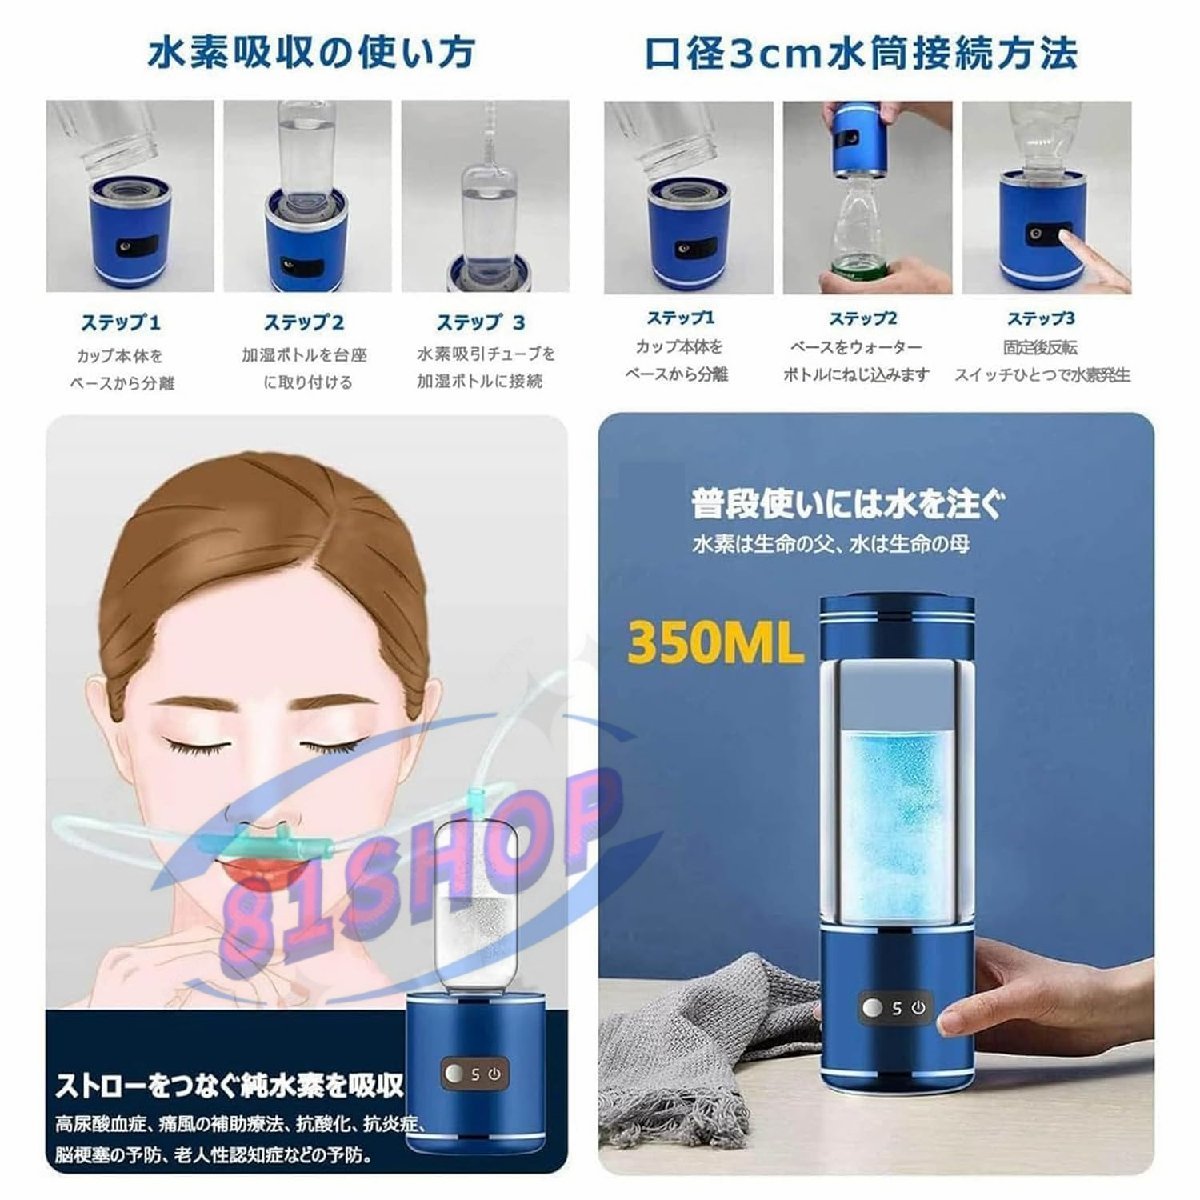 [81SHOP] water element aquatic . vessel high density portable water element water bottle magnetism adsorption rechargeable 2000PPB 350ML one pcs three position bottle type electrolysis water machine cold water / hot water circulation 